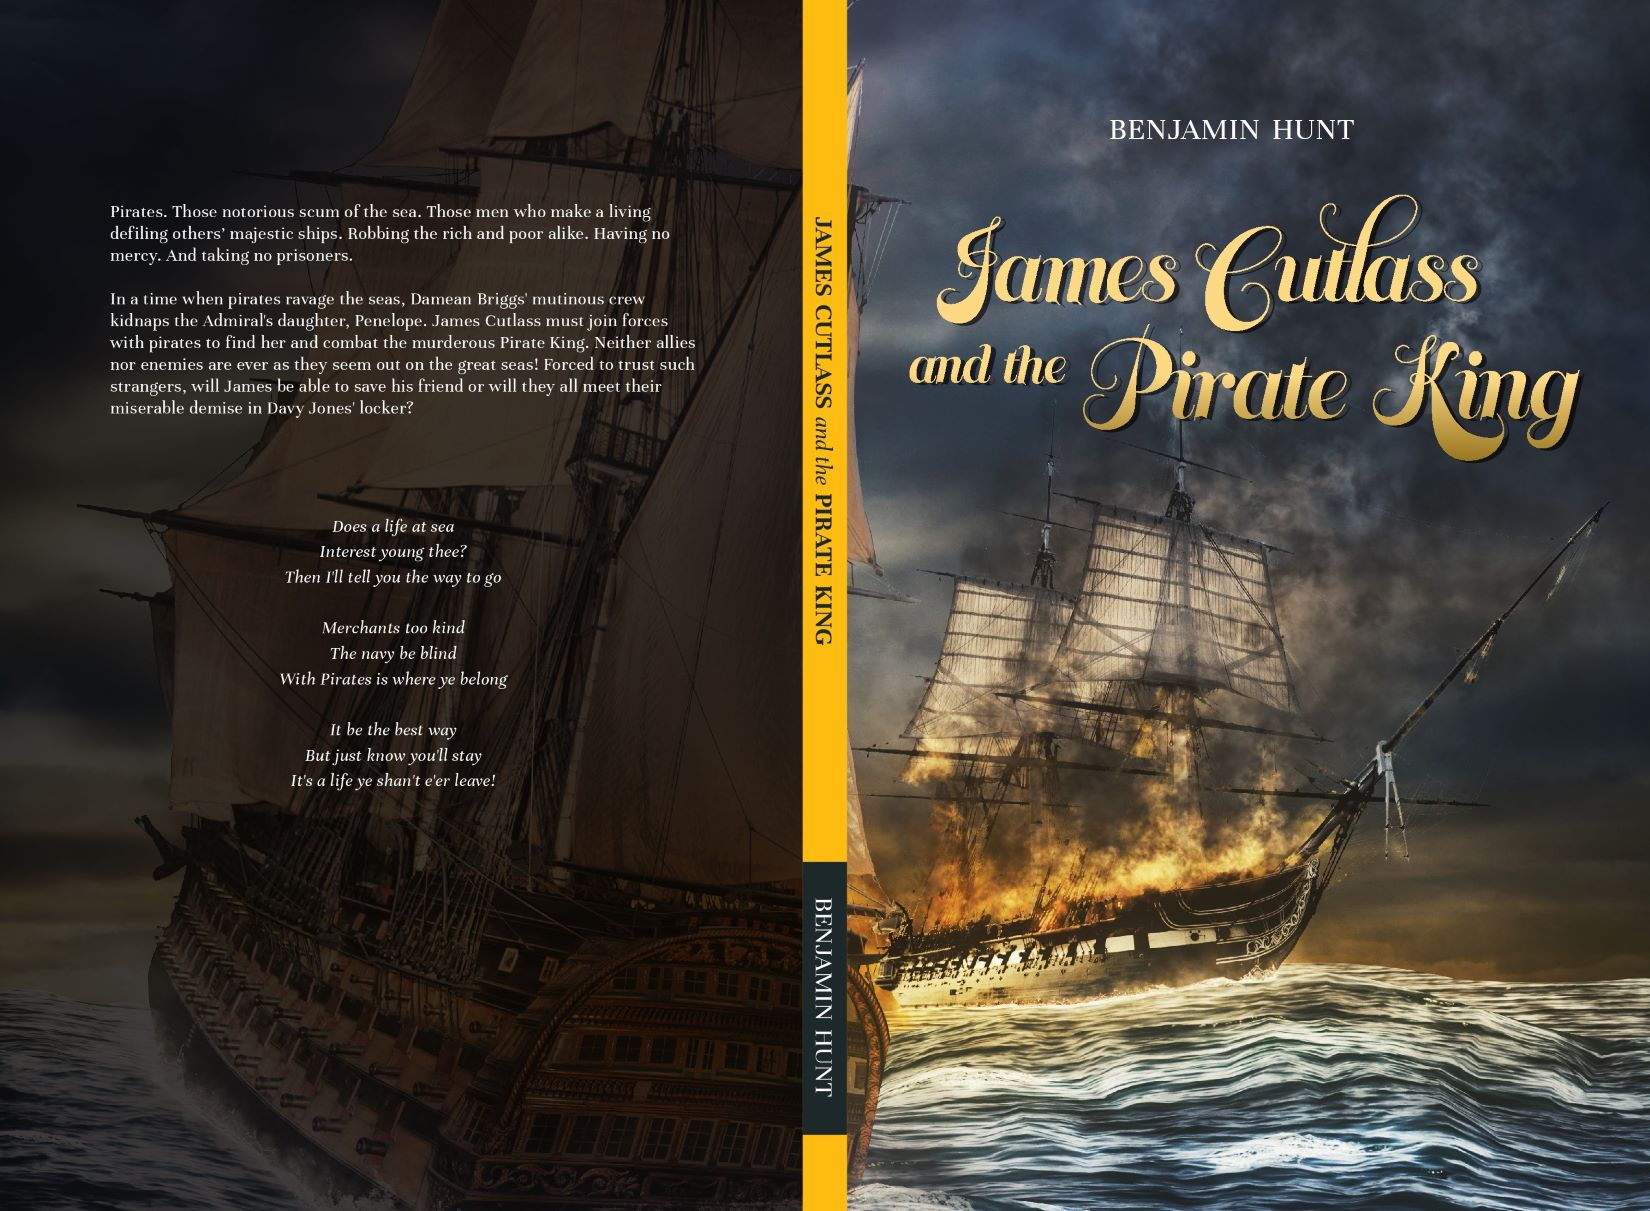 FREE: James Cutlass and the Pirate King by Benjamin Hunt